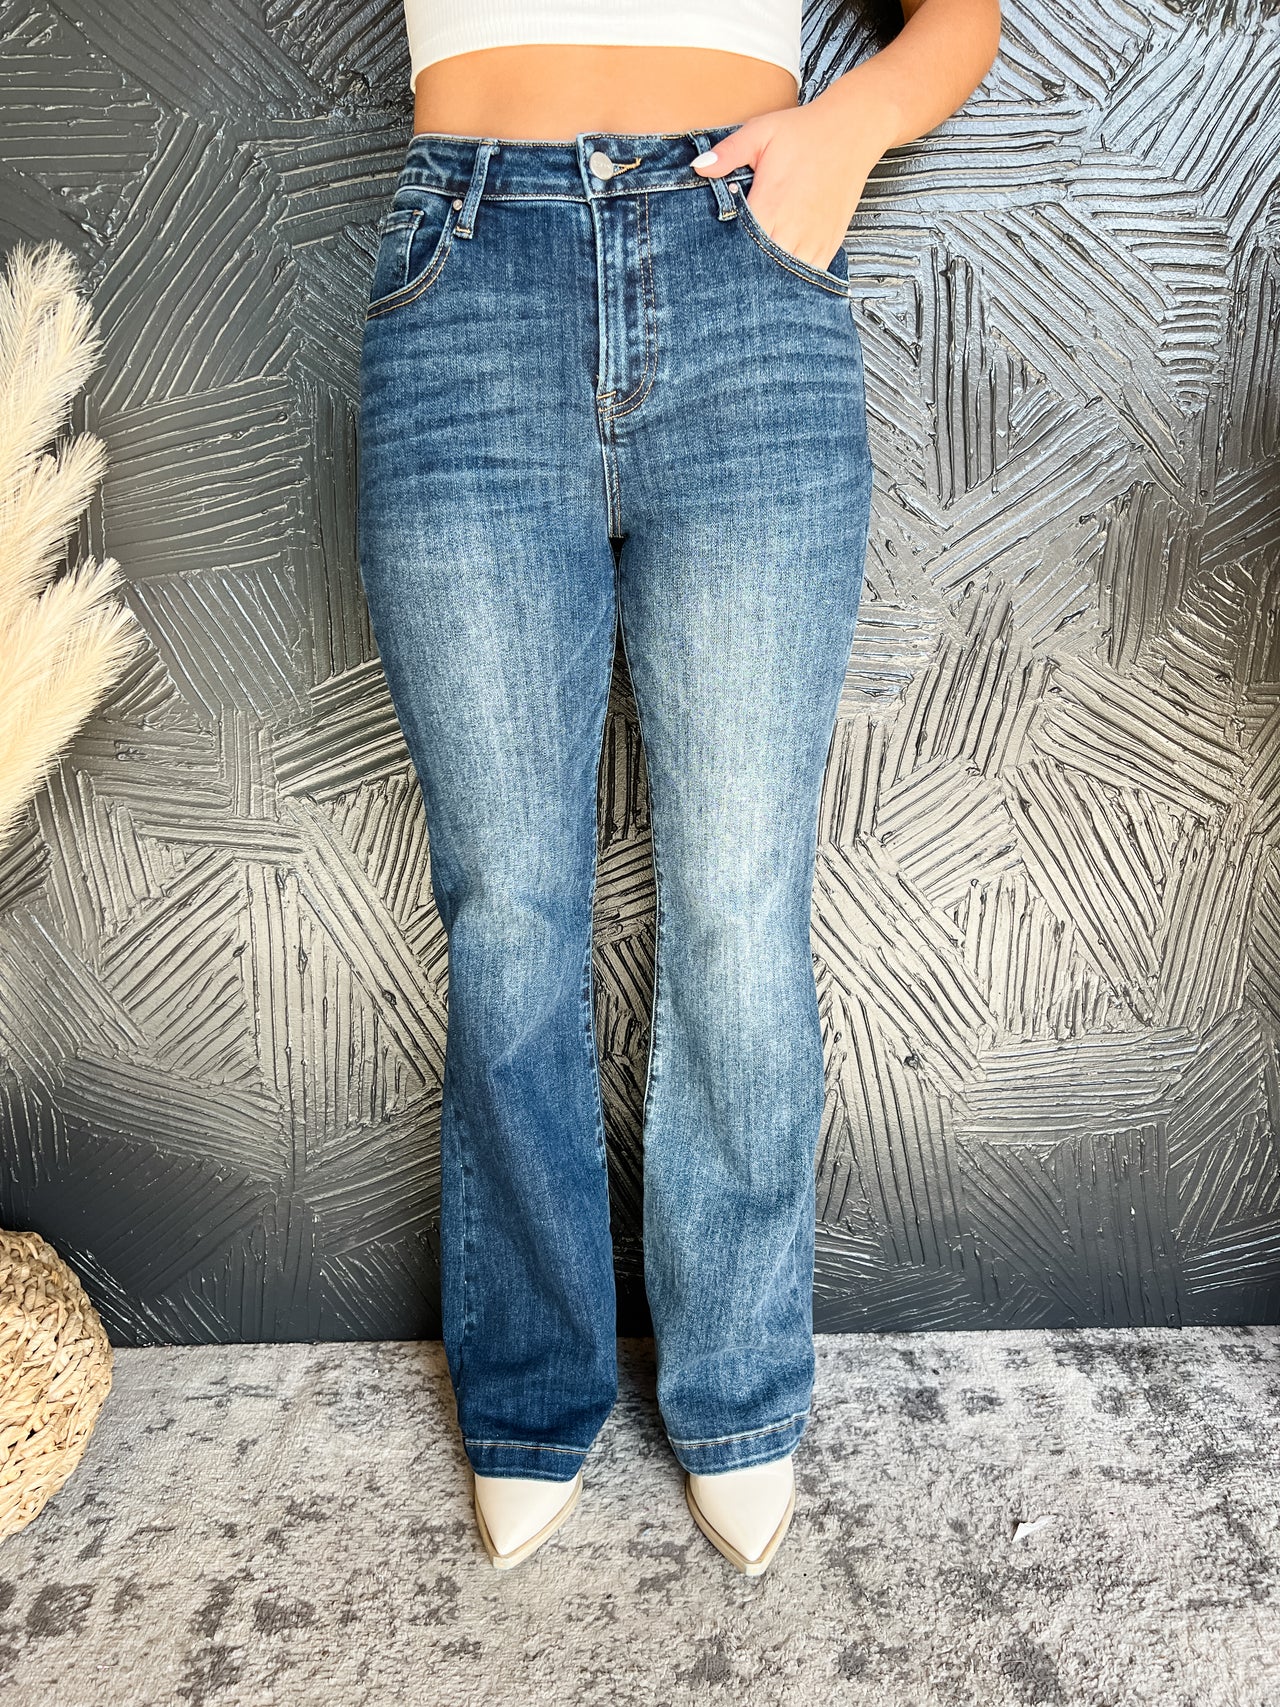 One Task At A Time Flare Jeans